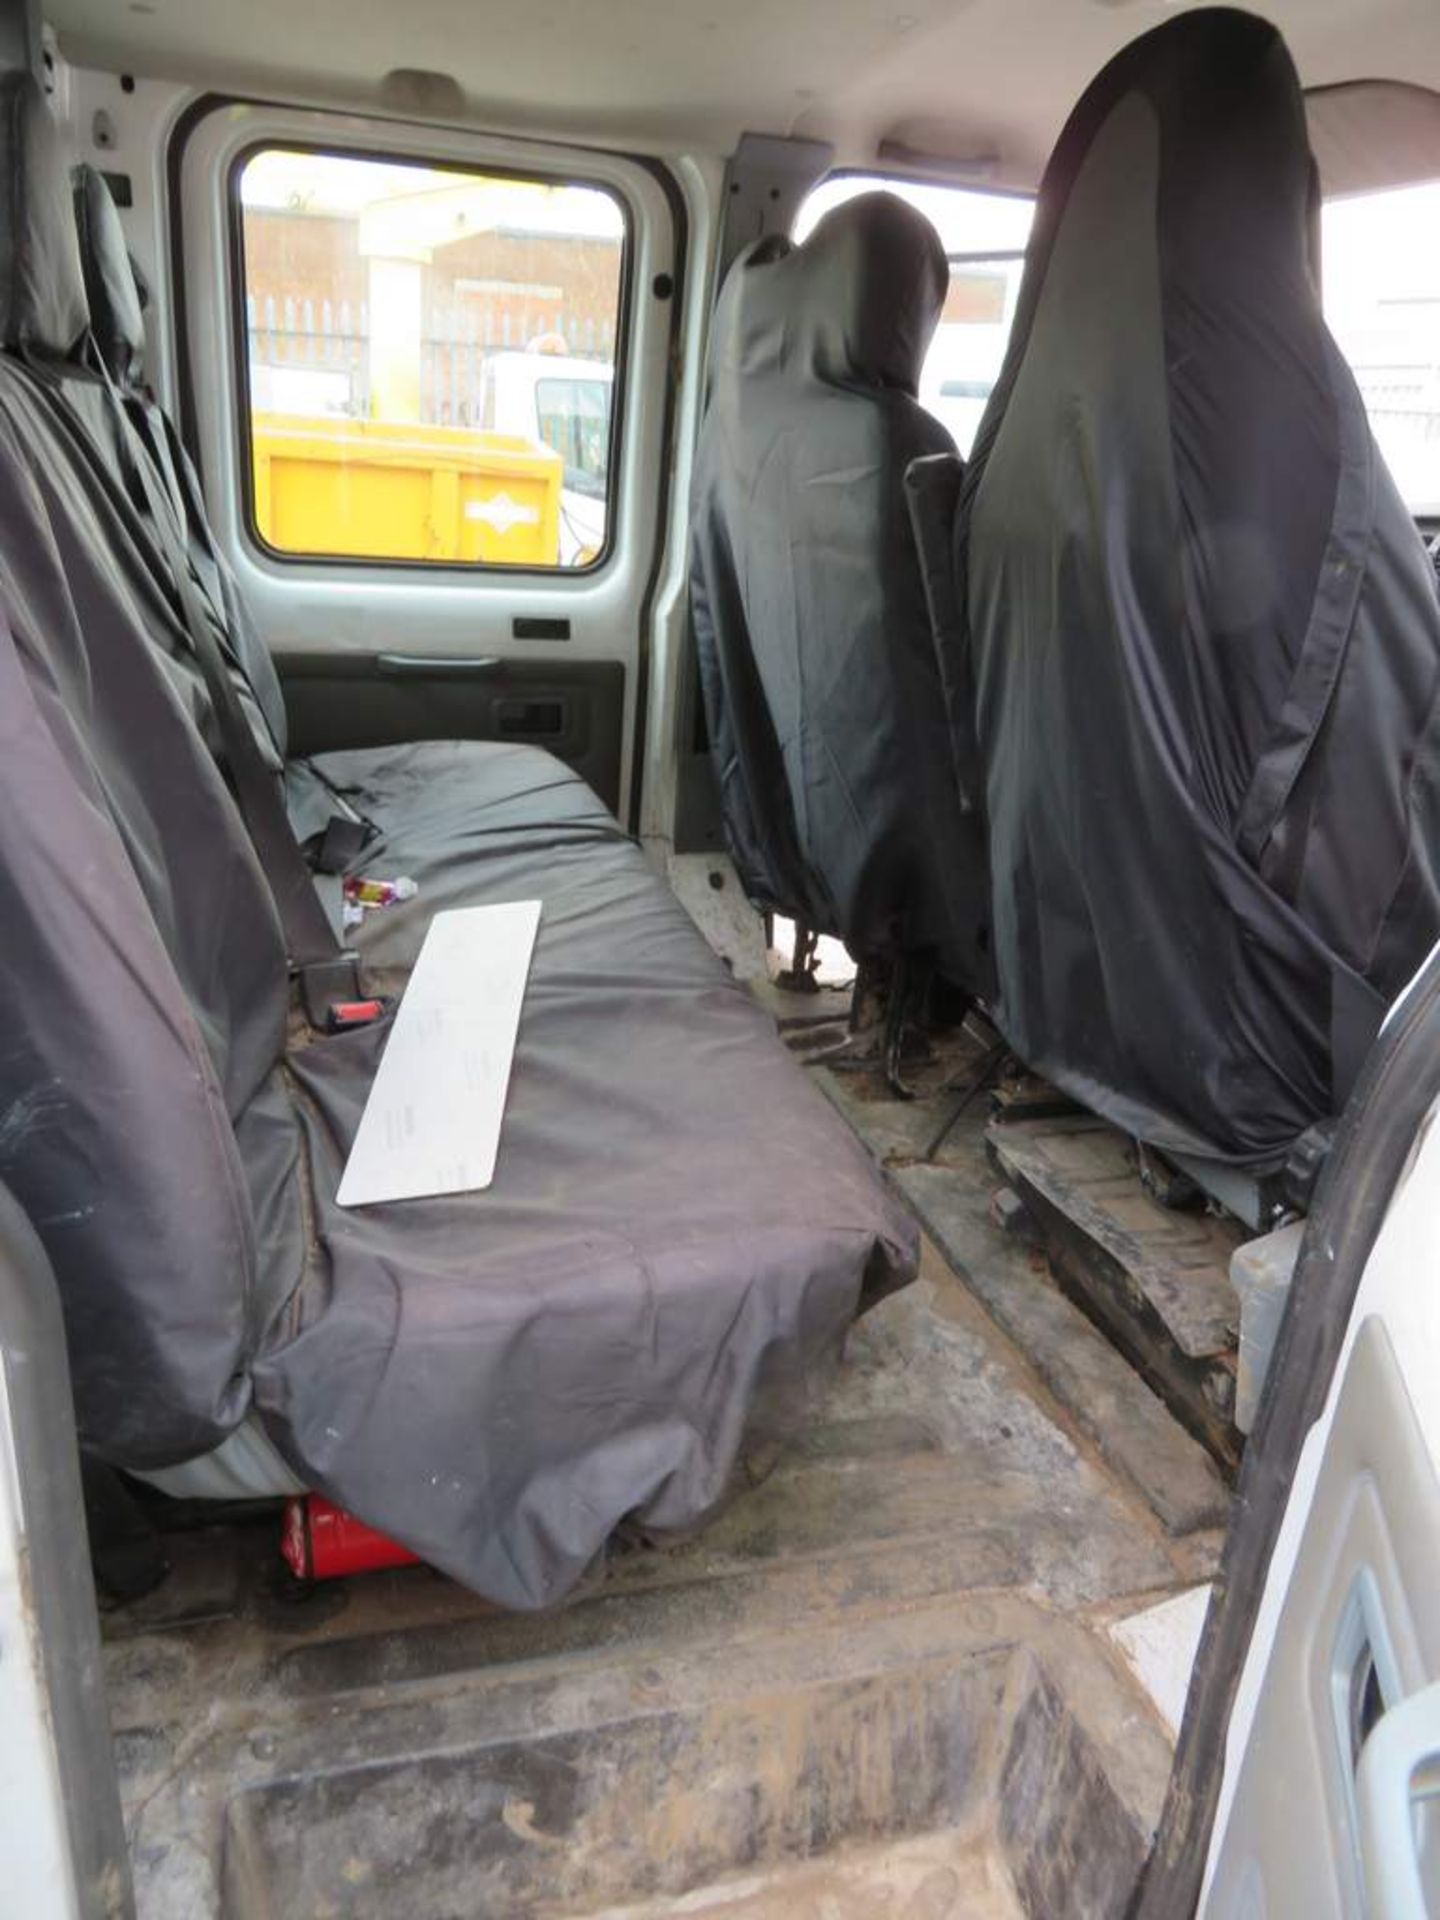 2009 Ford Transit T350L Double Cab Tipper - FX09 YDJ - Image 11 of 23